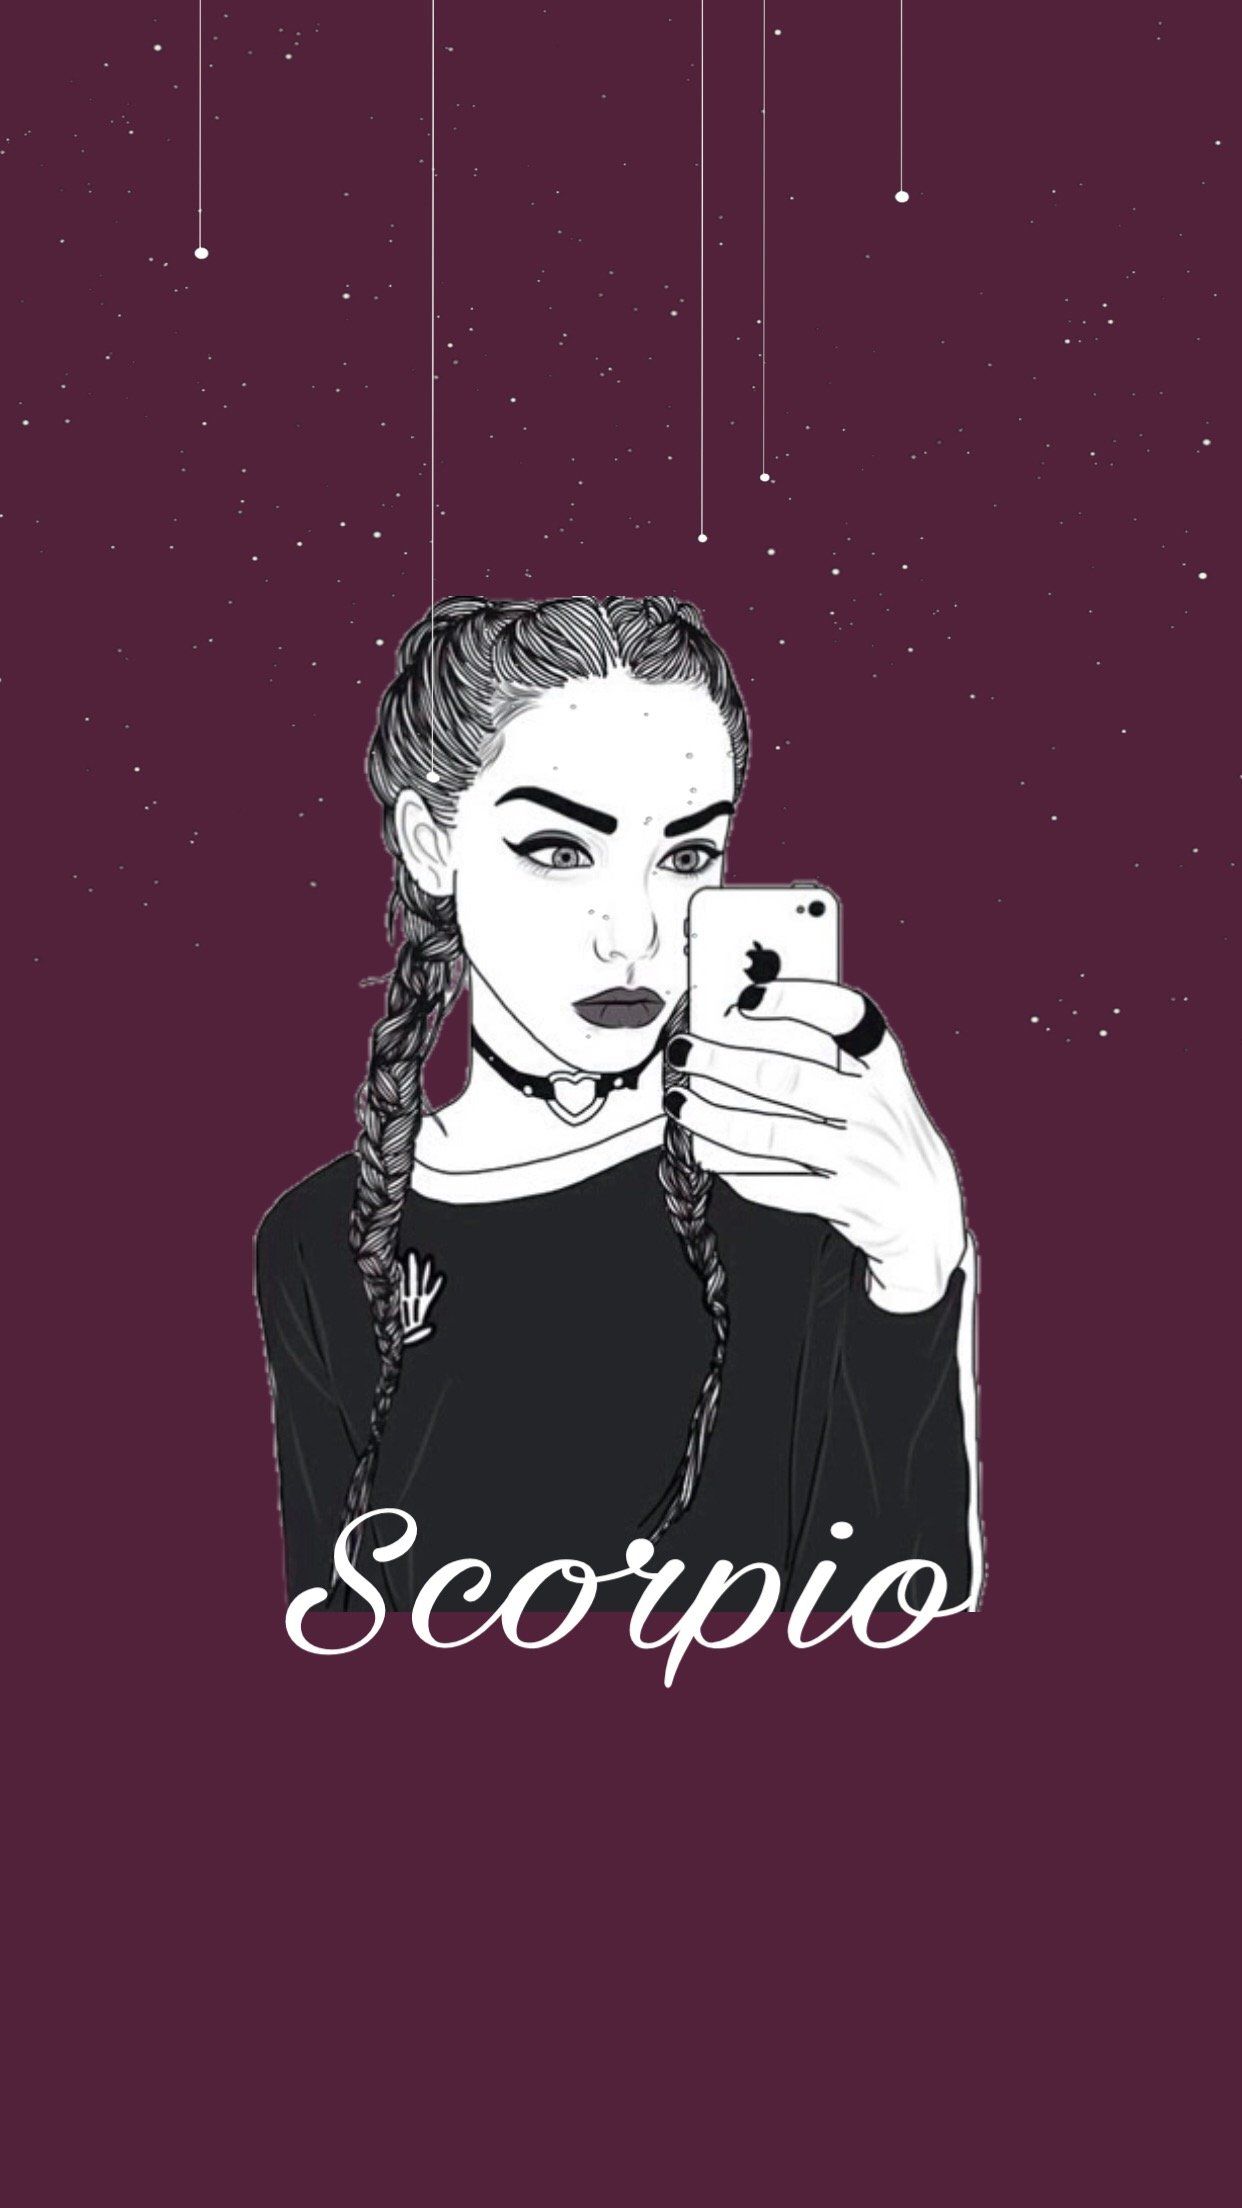 1,300+ Scorpio Stock Videos and Royalty-Free Footage - iStock | Scorpio  zodiac, Scorpio sign, Scorpio constellation